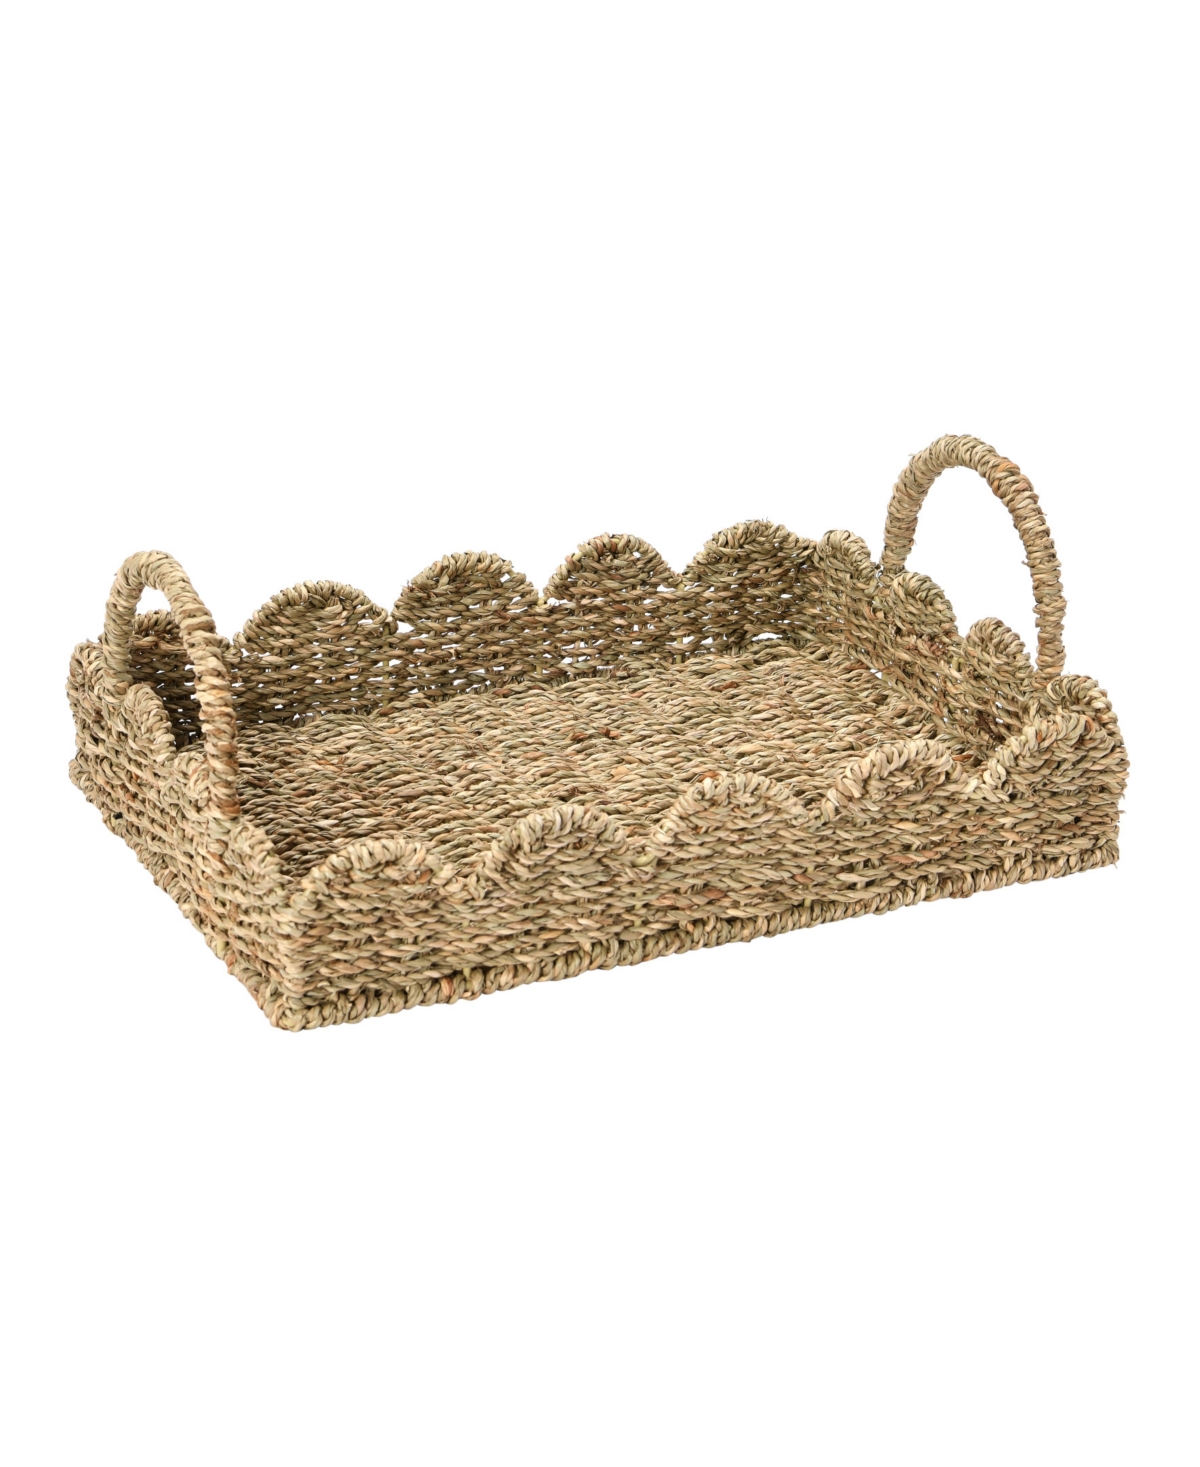 Household Essentials Seagrass Scallop Edge Tray In Natural